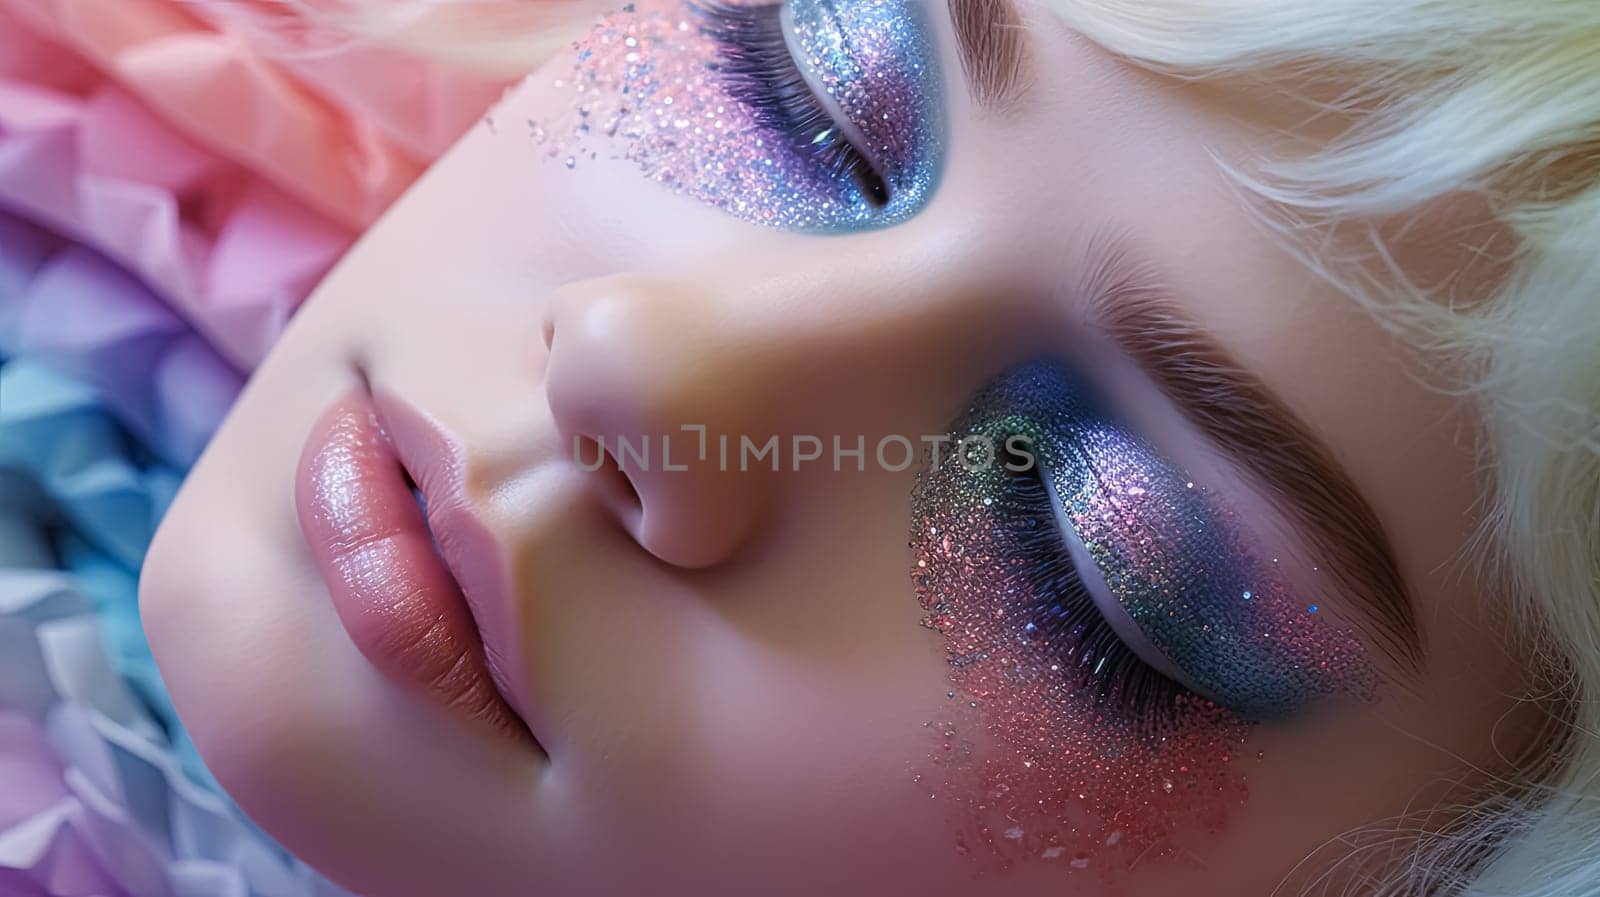 A woman with blue and purple eyeshadow and glittery makeup. She is sleeping. The makeup is very colorful and sparkly